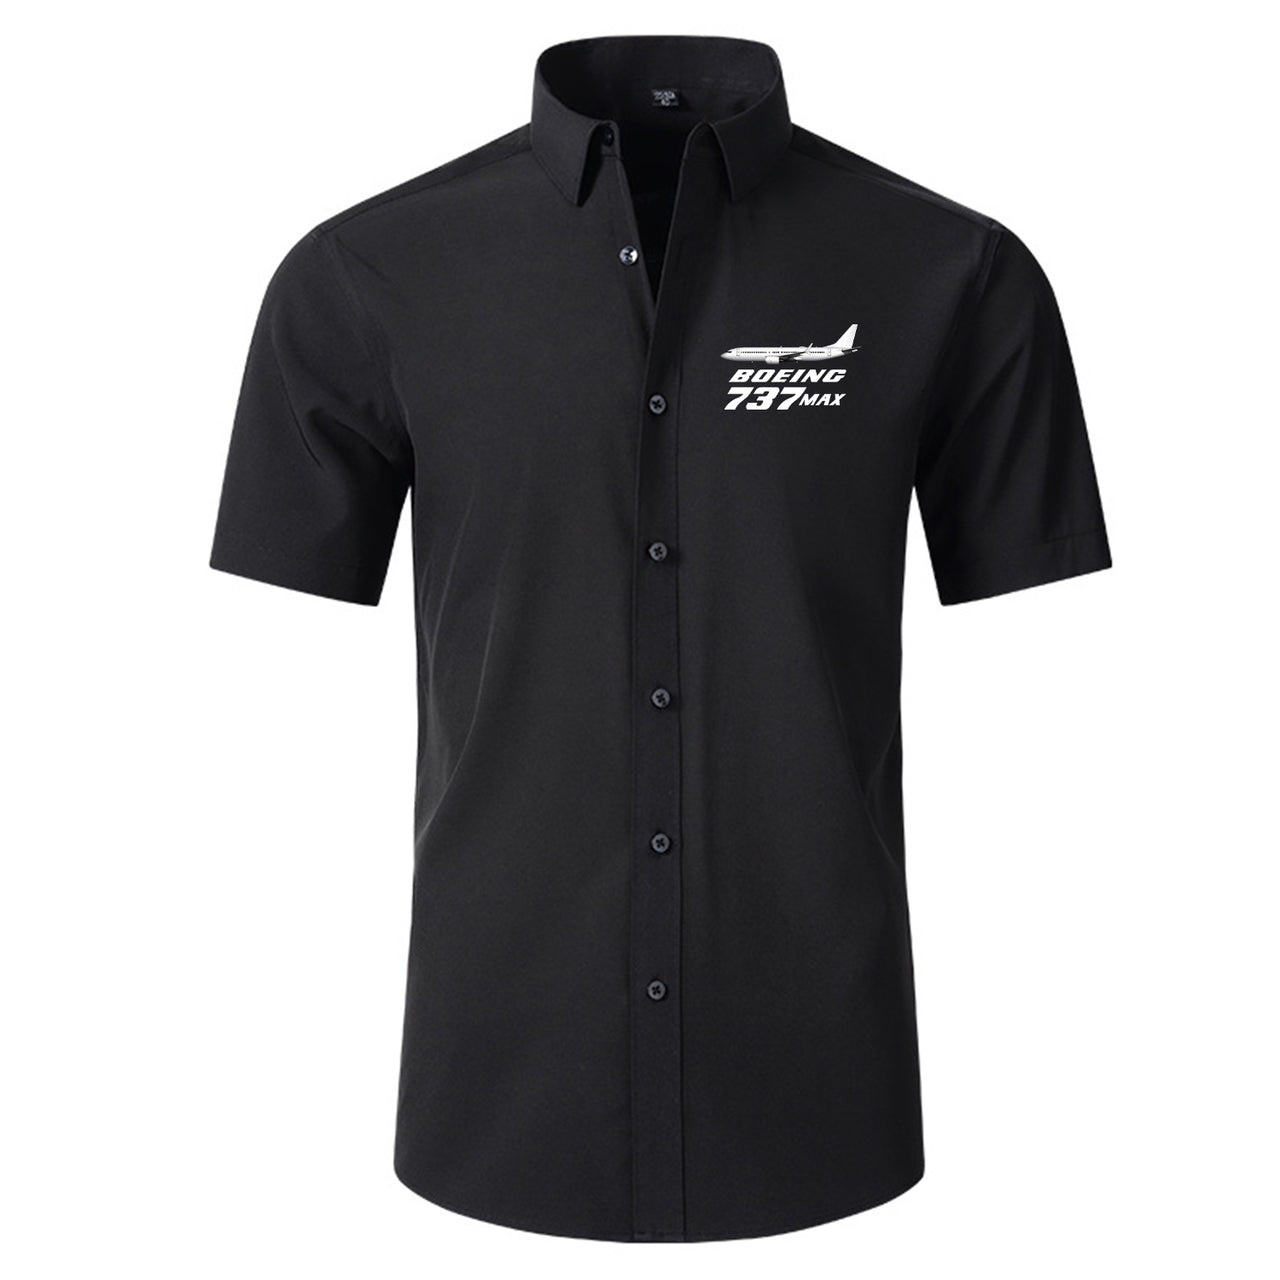 The Boeing 737Max Designed Short Sleeve Shirts